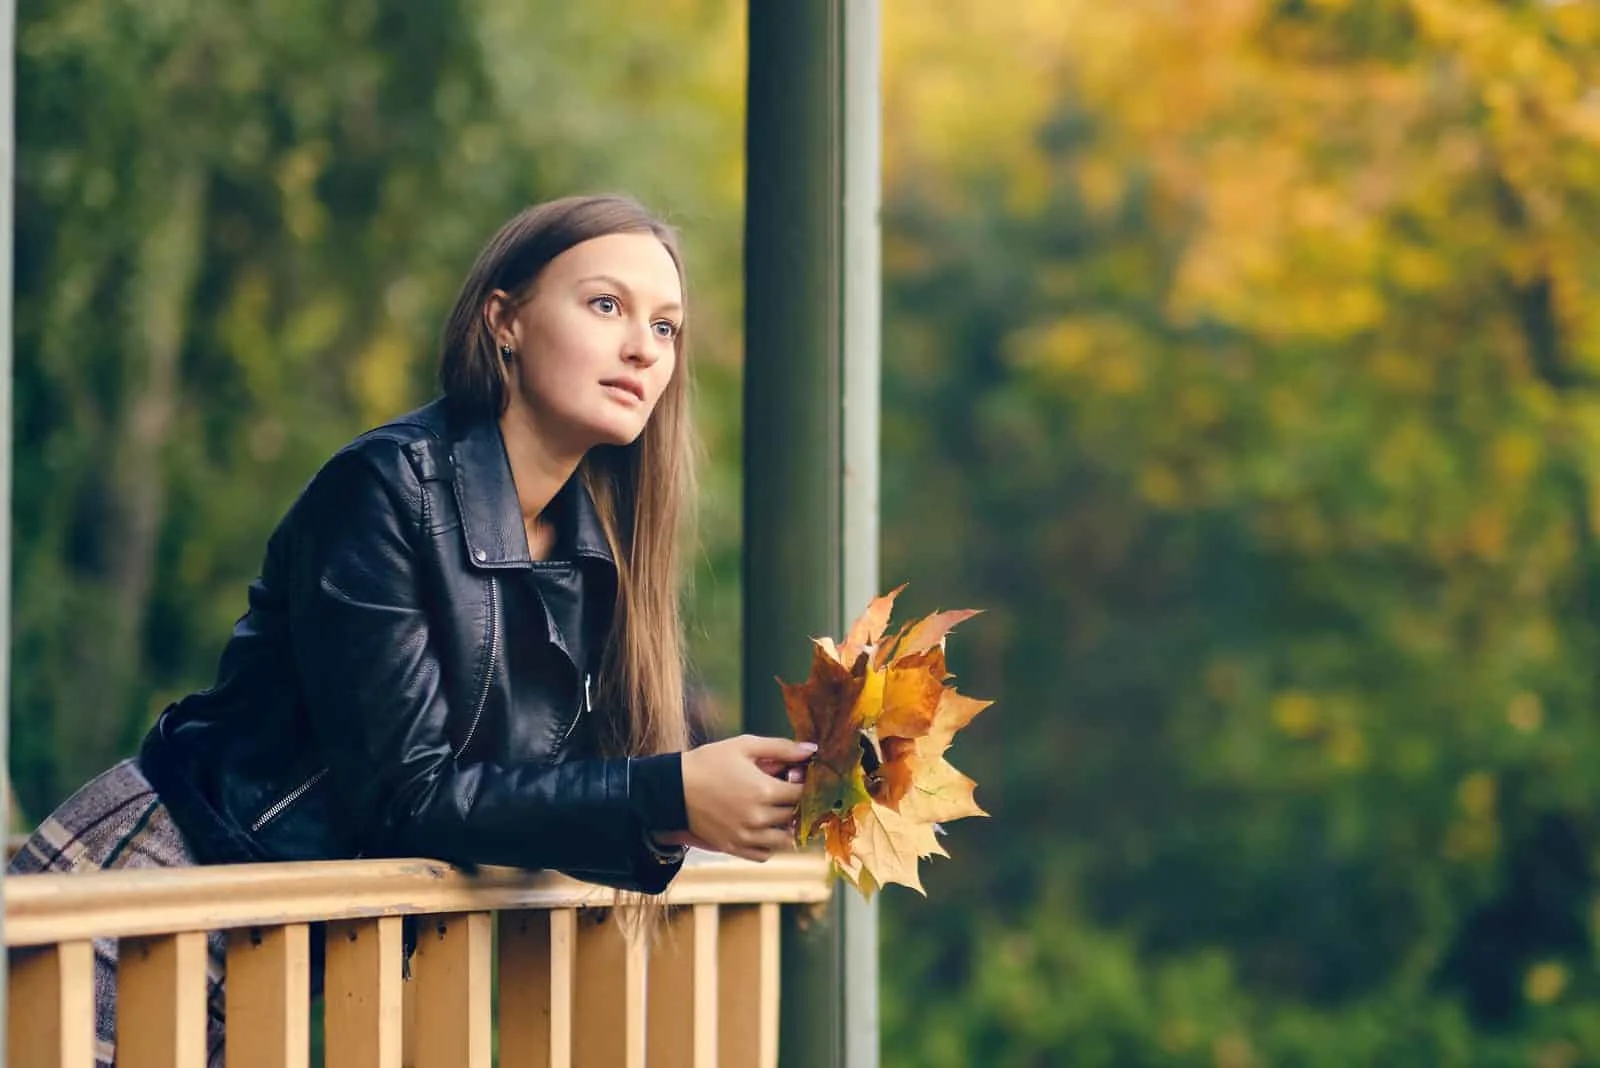 the woman stands on the terrace with leaves in her hands and thinks anxiously